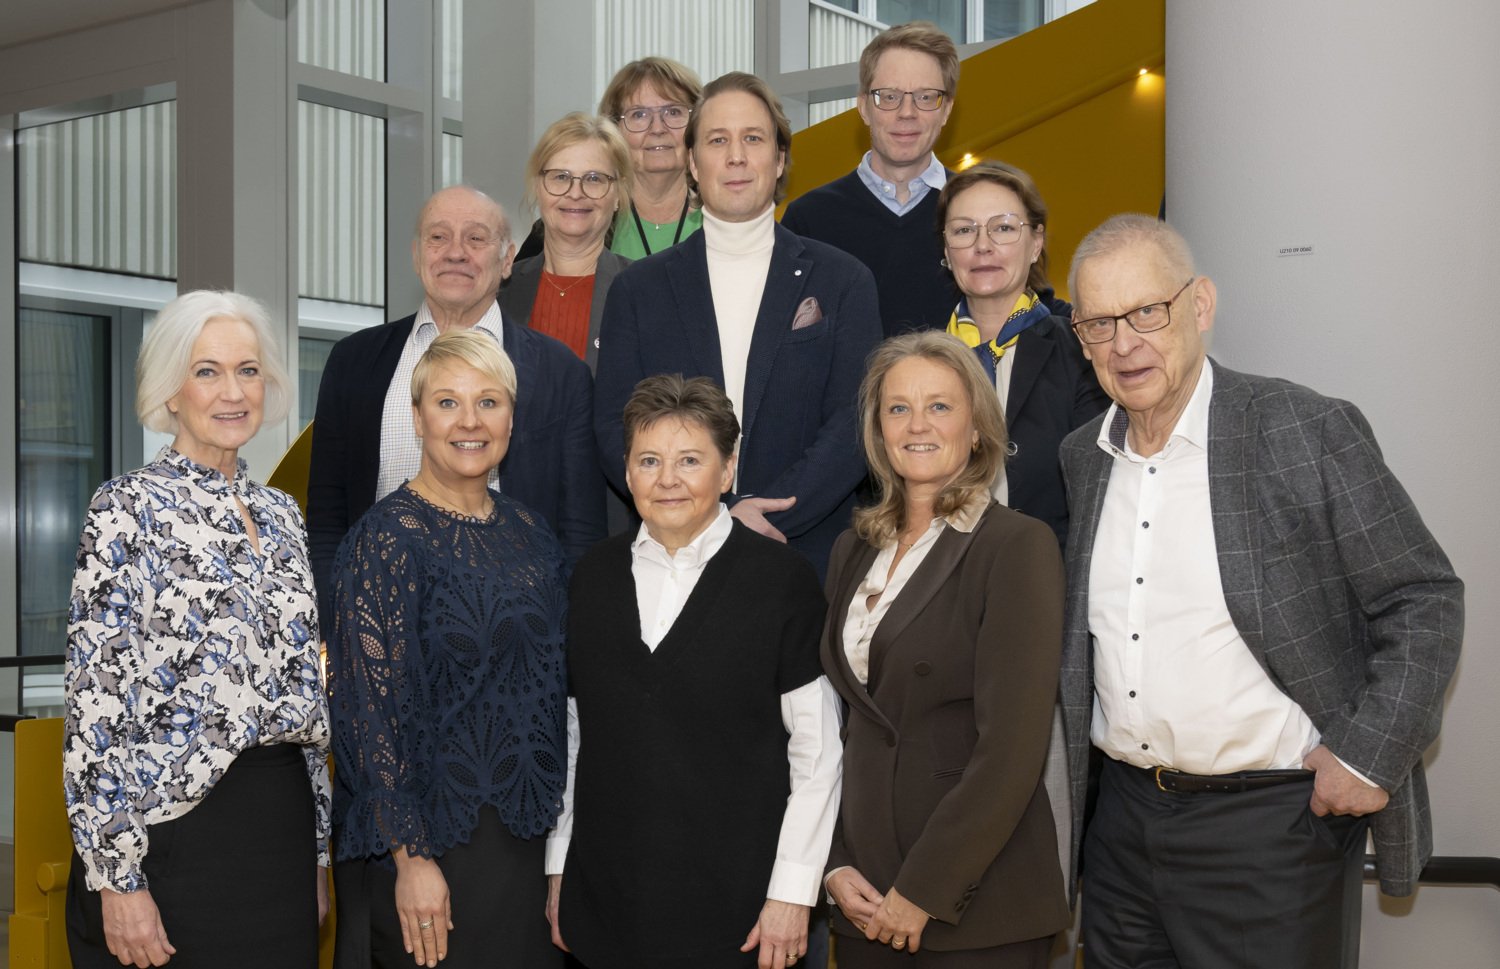 Group photo of Bengt Winblad with ministers Acko Anckarberg Johansson and Anna Tenje, and colleagues.